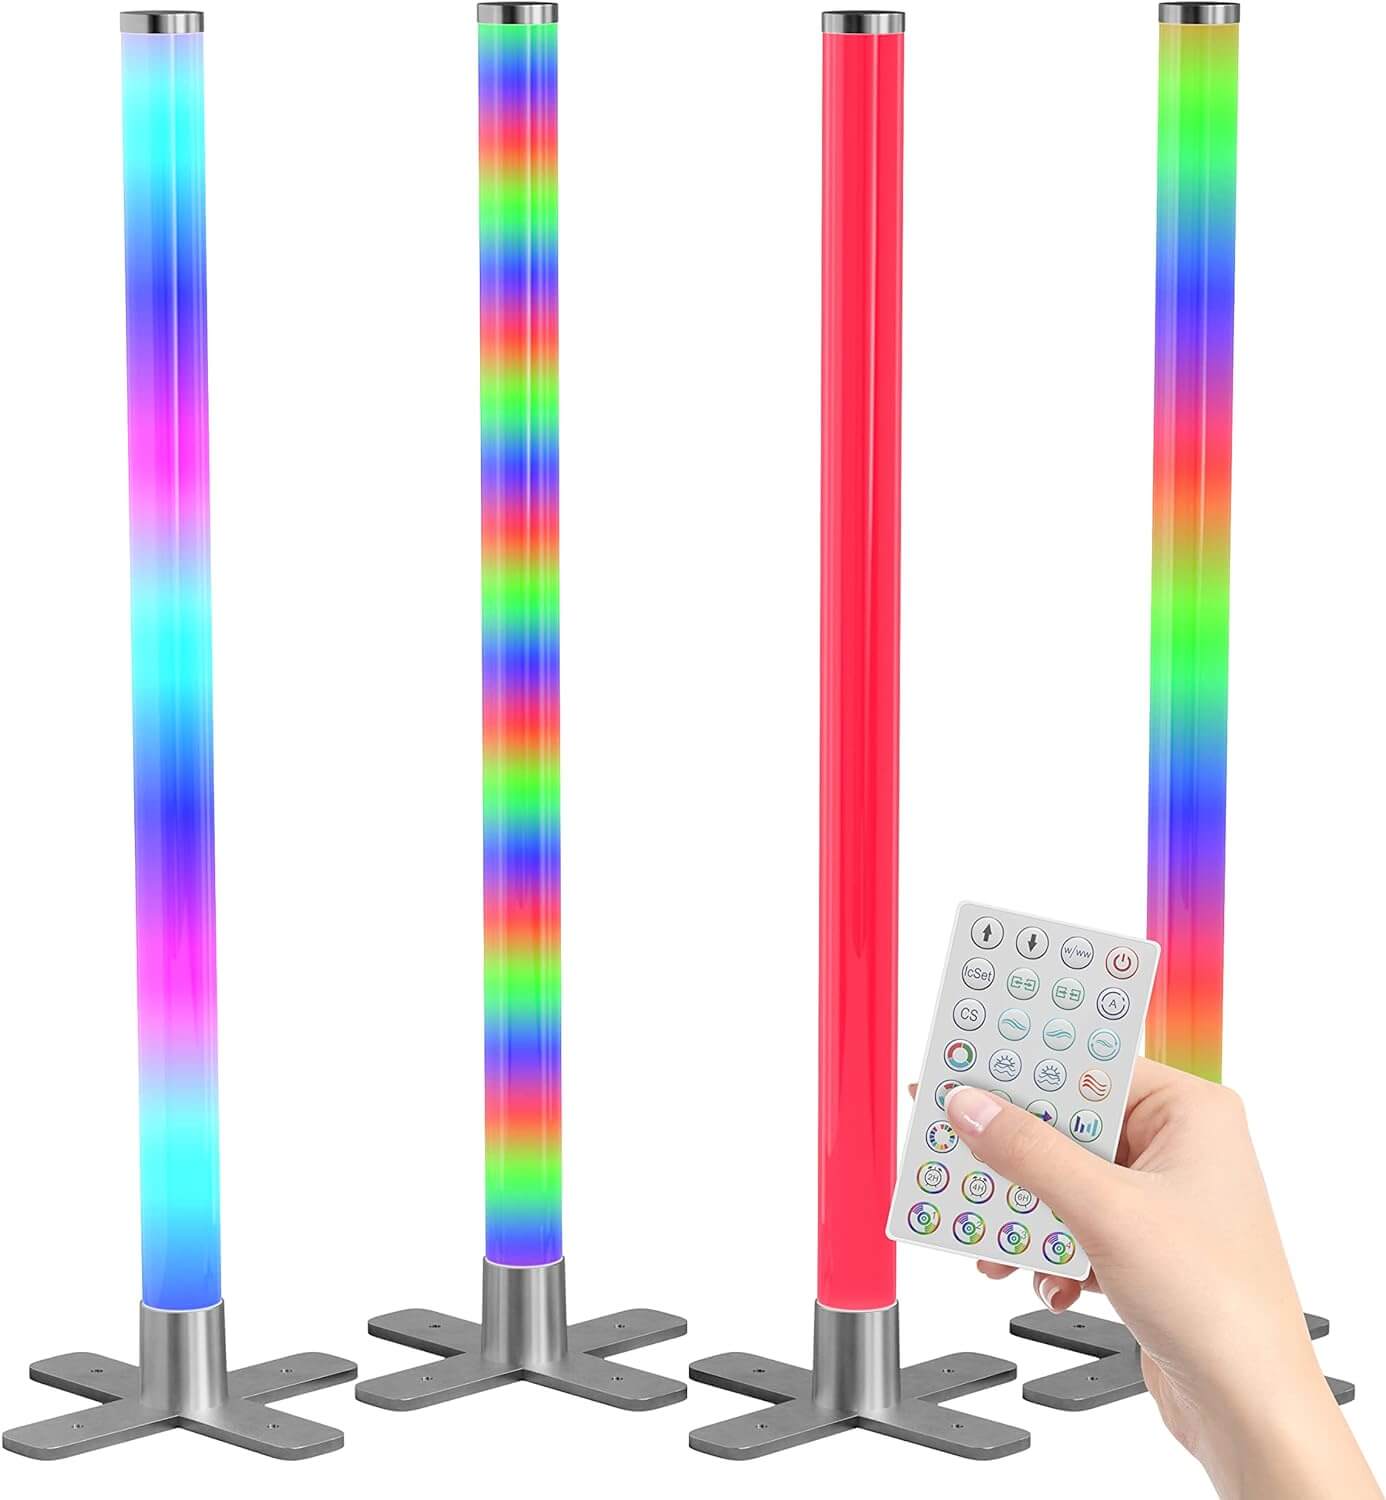 Different colors of the LED Rocket Light Tube with Remote.